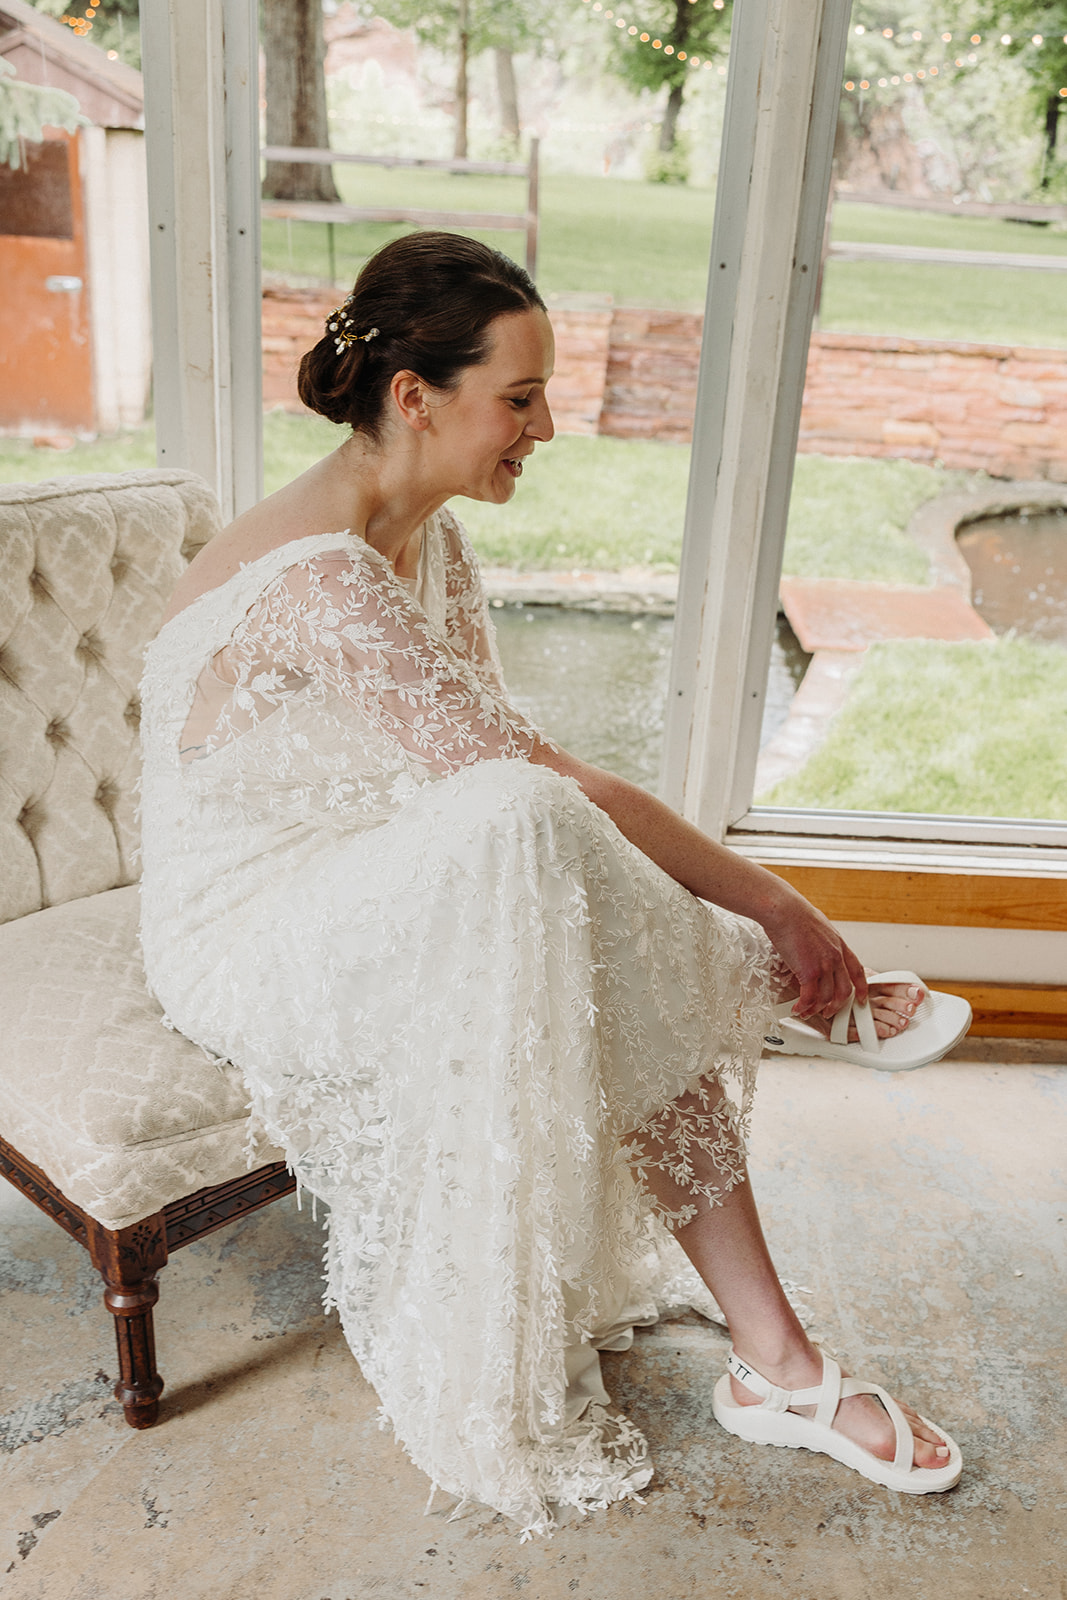 Bride in her wedding dress sits on a white chair as she puts on her white wedding chacos.